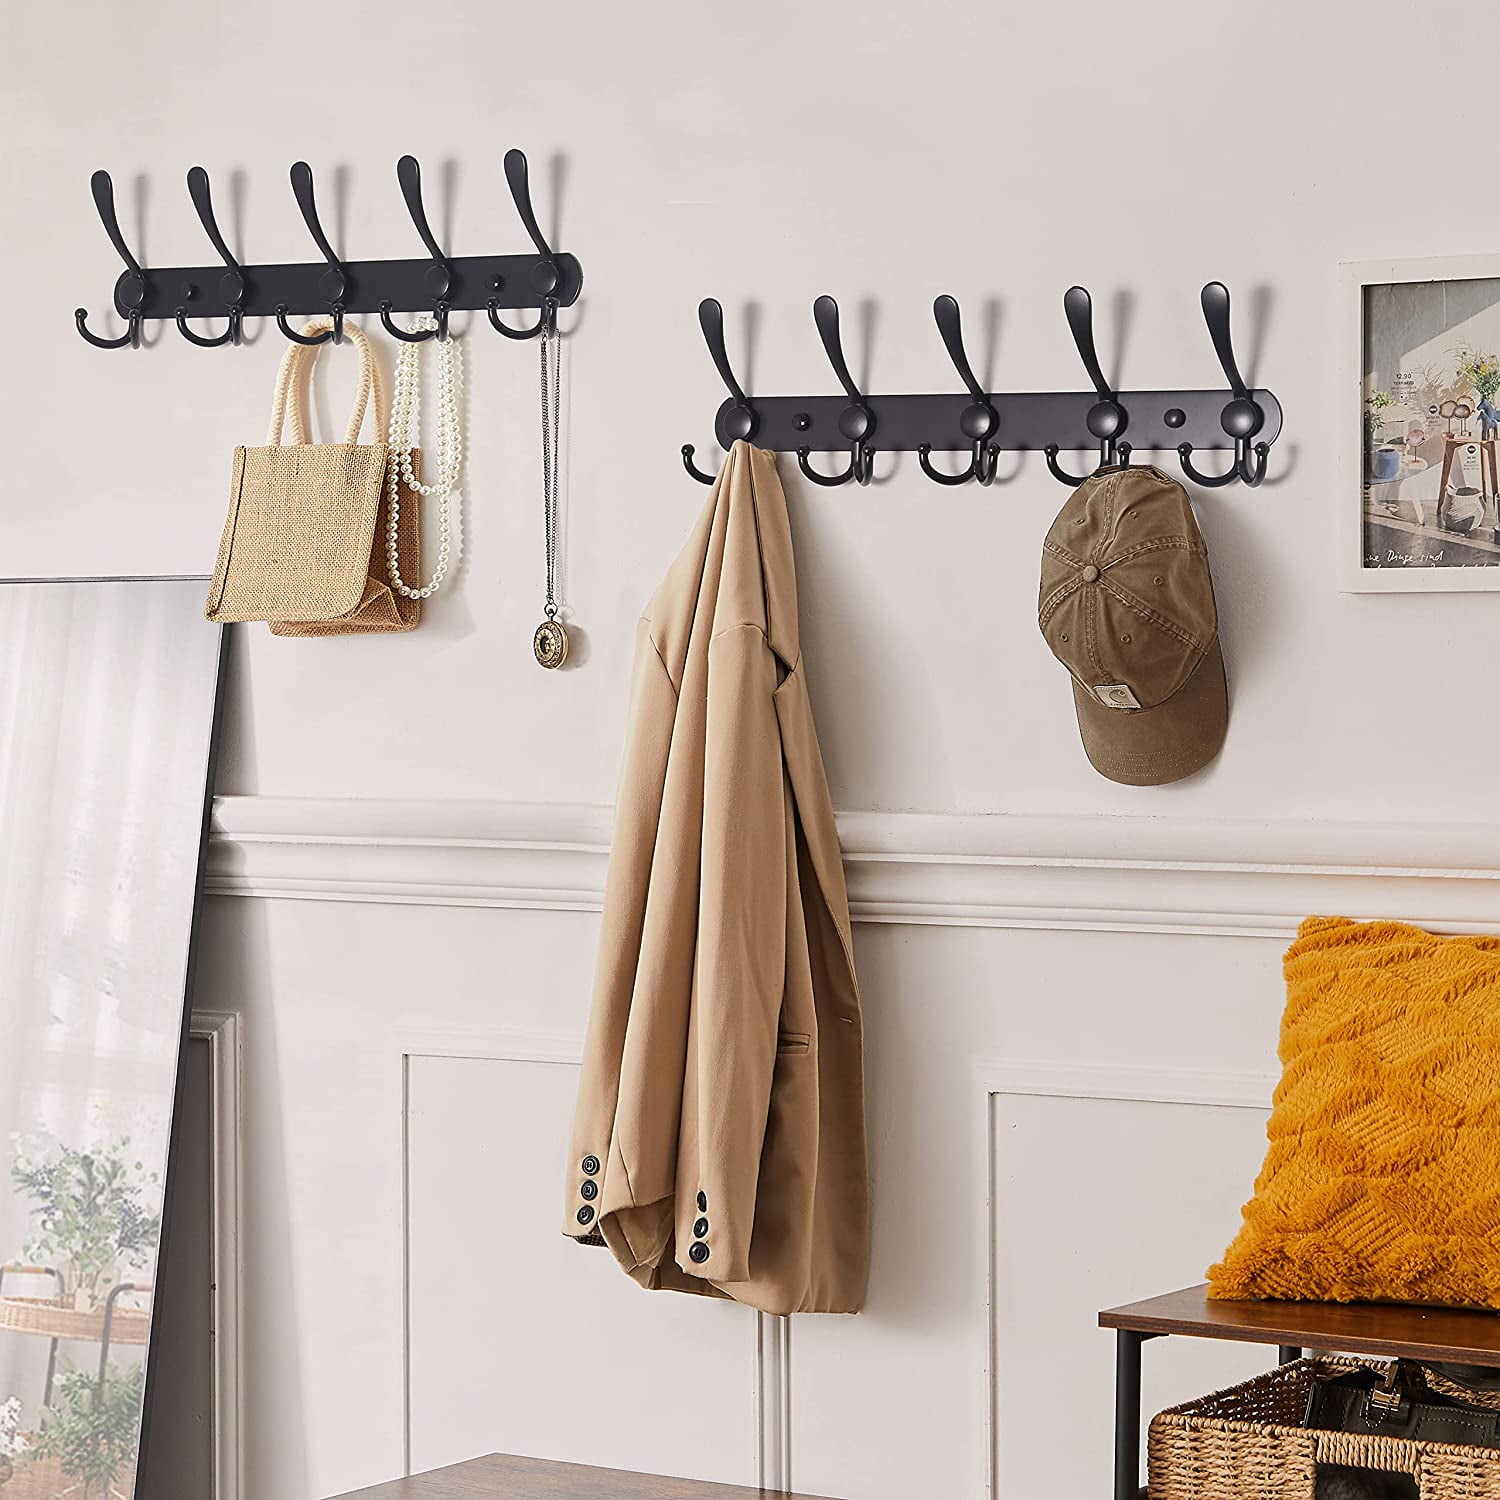 Lfhope Coat Rack Wall Mount with Movable 5 Metal Hooks, Wooden Coat Rack Farmhouse Coat Hangers for Coat Hat Towel Purse Robes Mudroom Bathroom